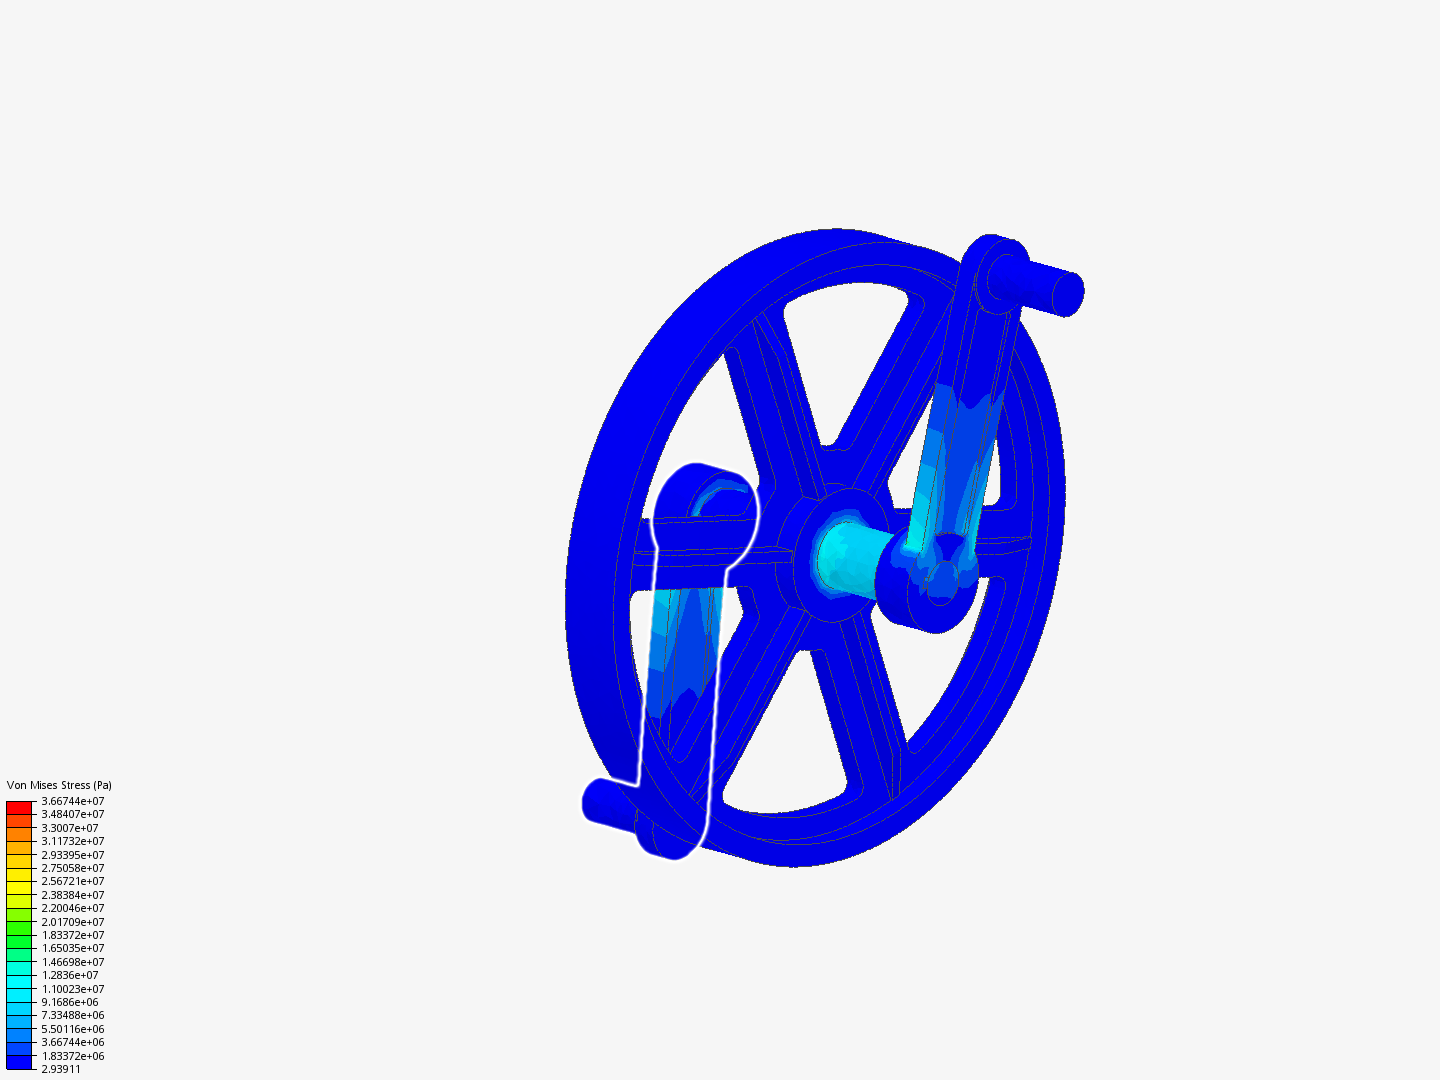 Practical Exam: Simulation of a Crank Assembly - Copy image